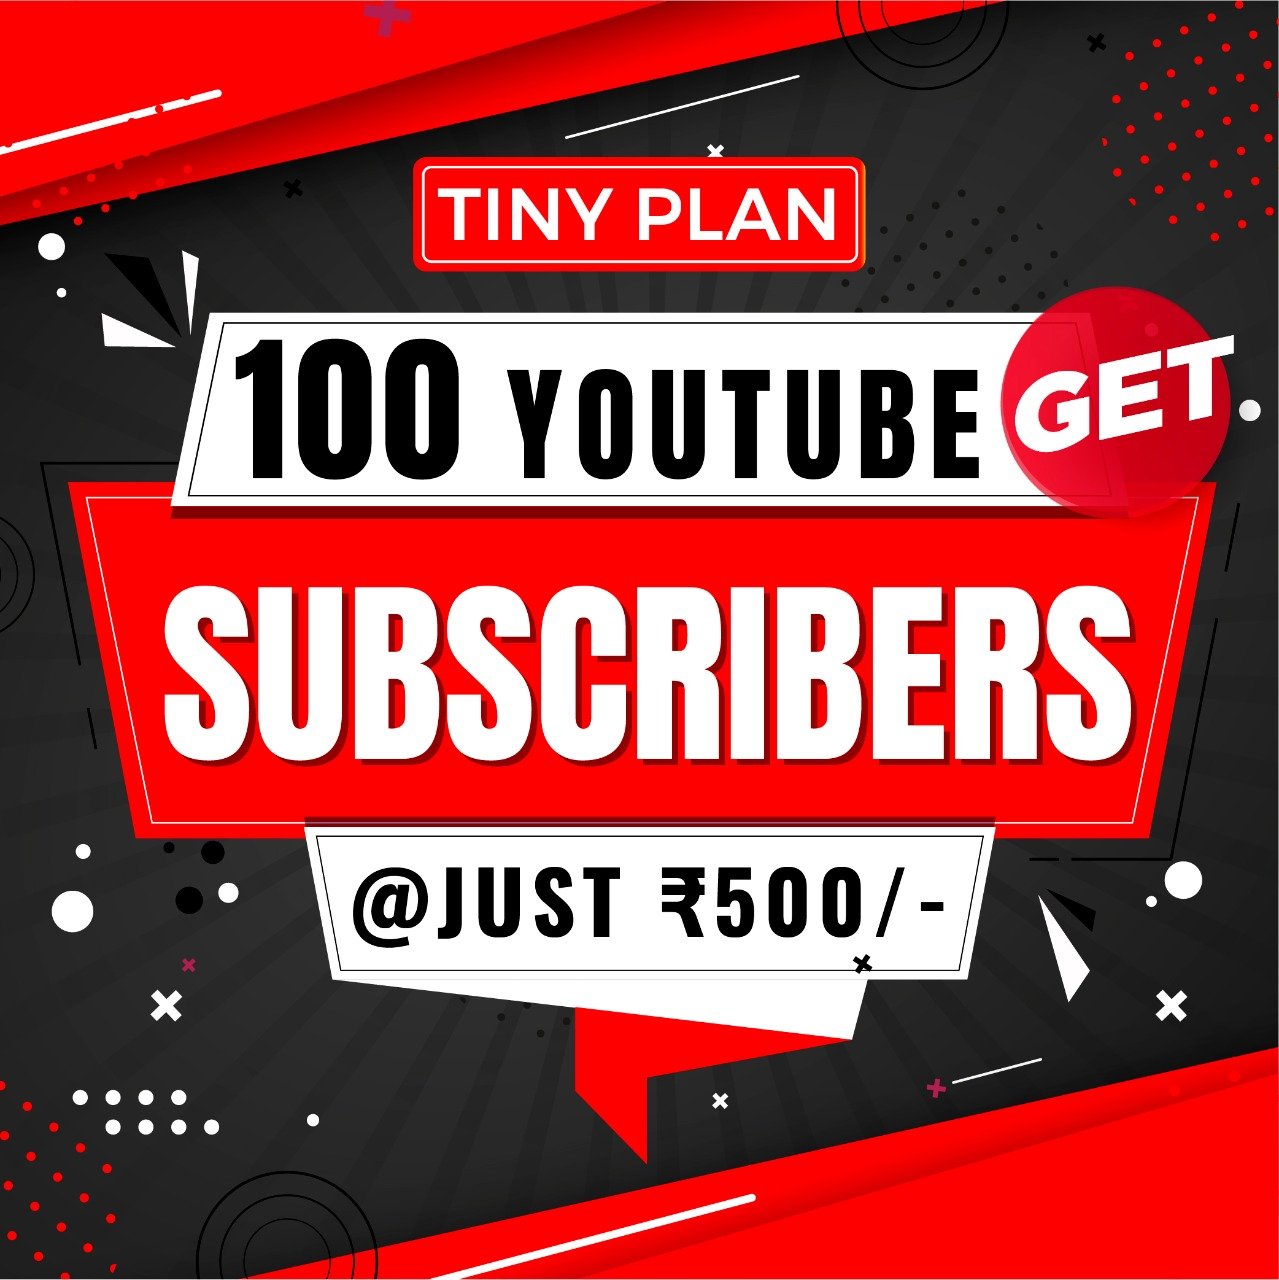 Get 100 Real YouTube Subscribers